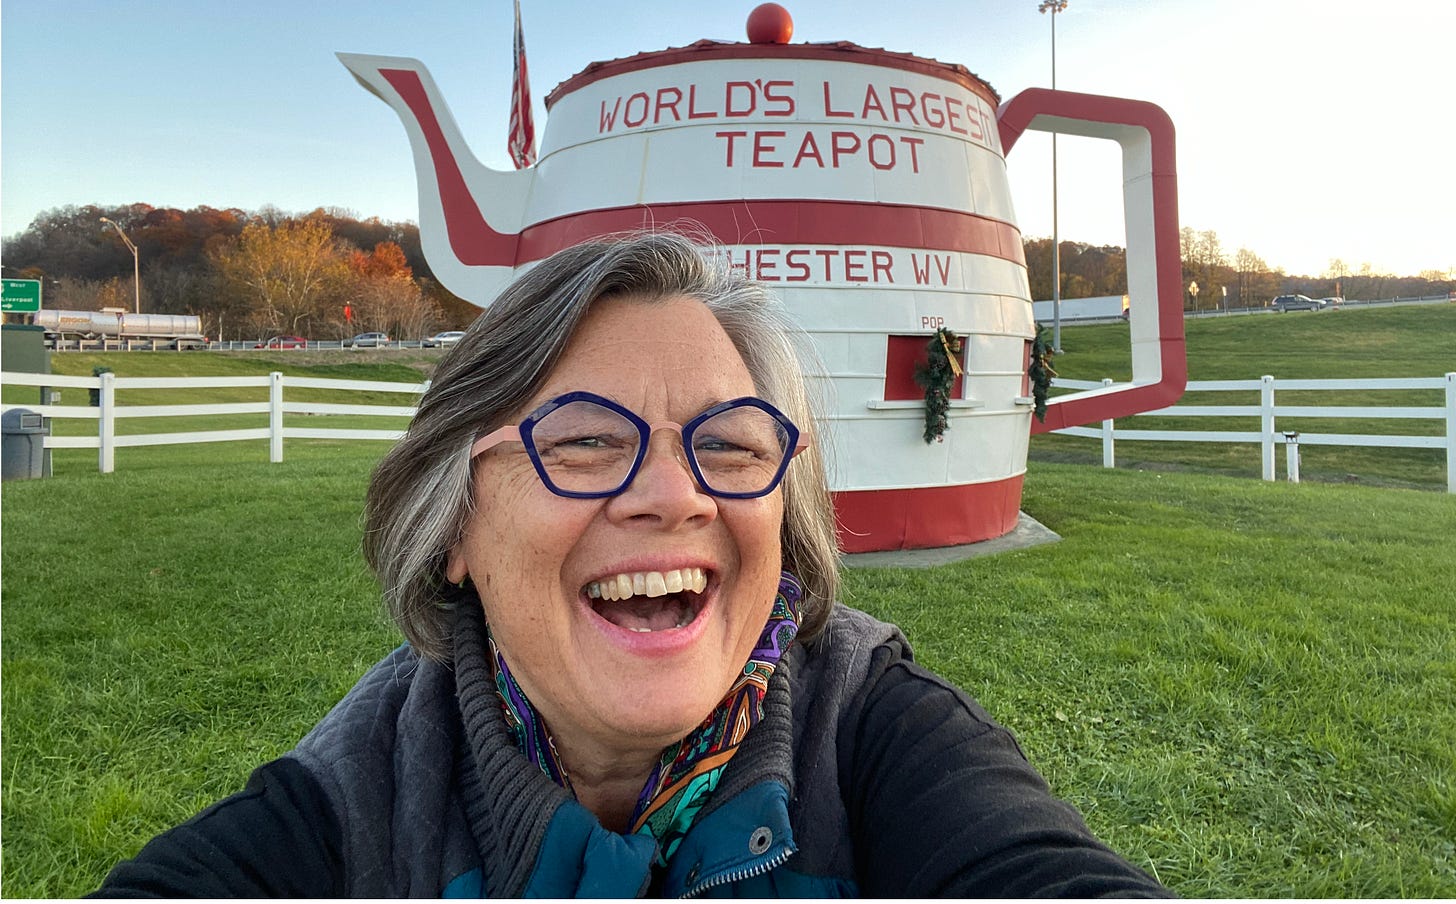 Tamela standing in front of the world's largest teapot in Chester, West Virginia